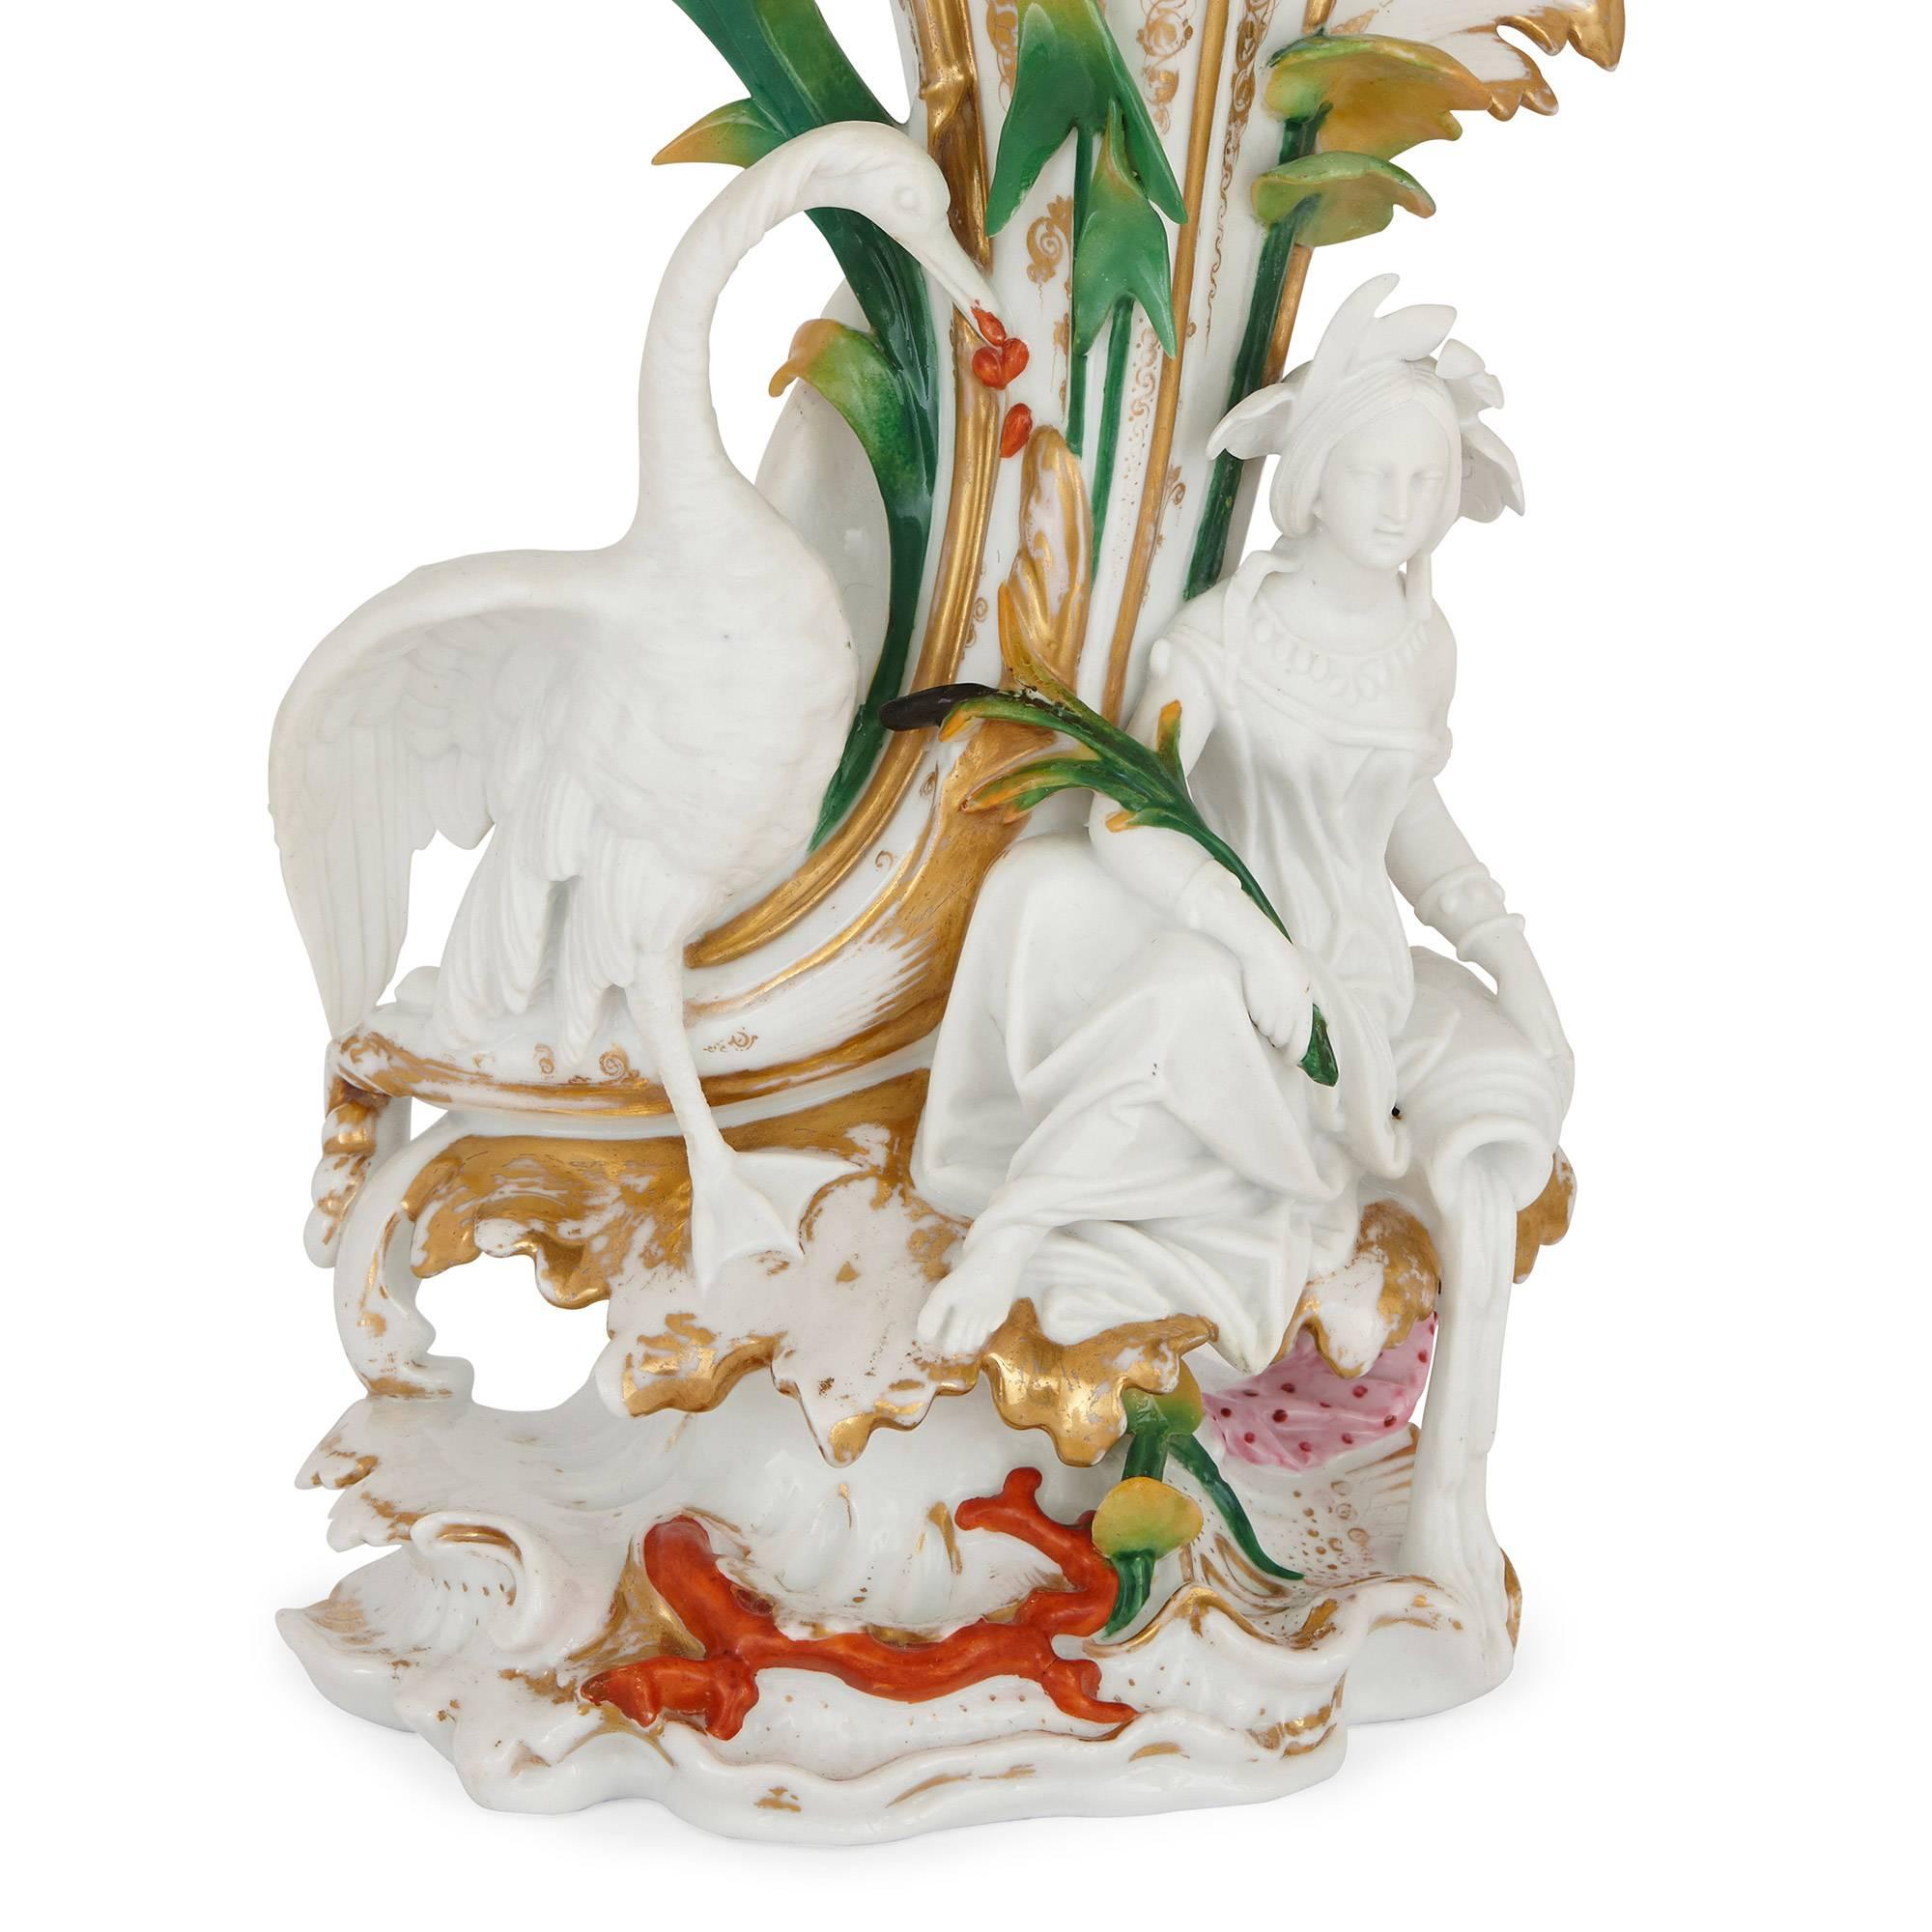 Each of trumpet shape with applied allegorical figures of Napoleon III.

These beautiful porcelain vases are distinctive for their bright, fresh color palette and trumpet shaped necks, conjuring images of floral abundance.